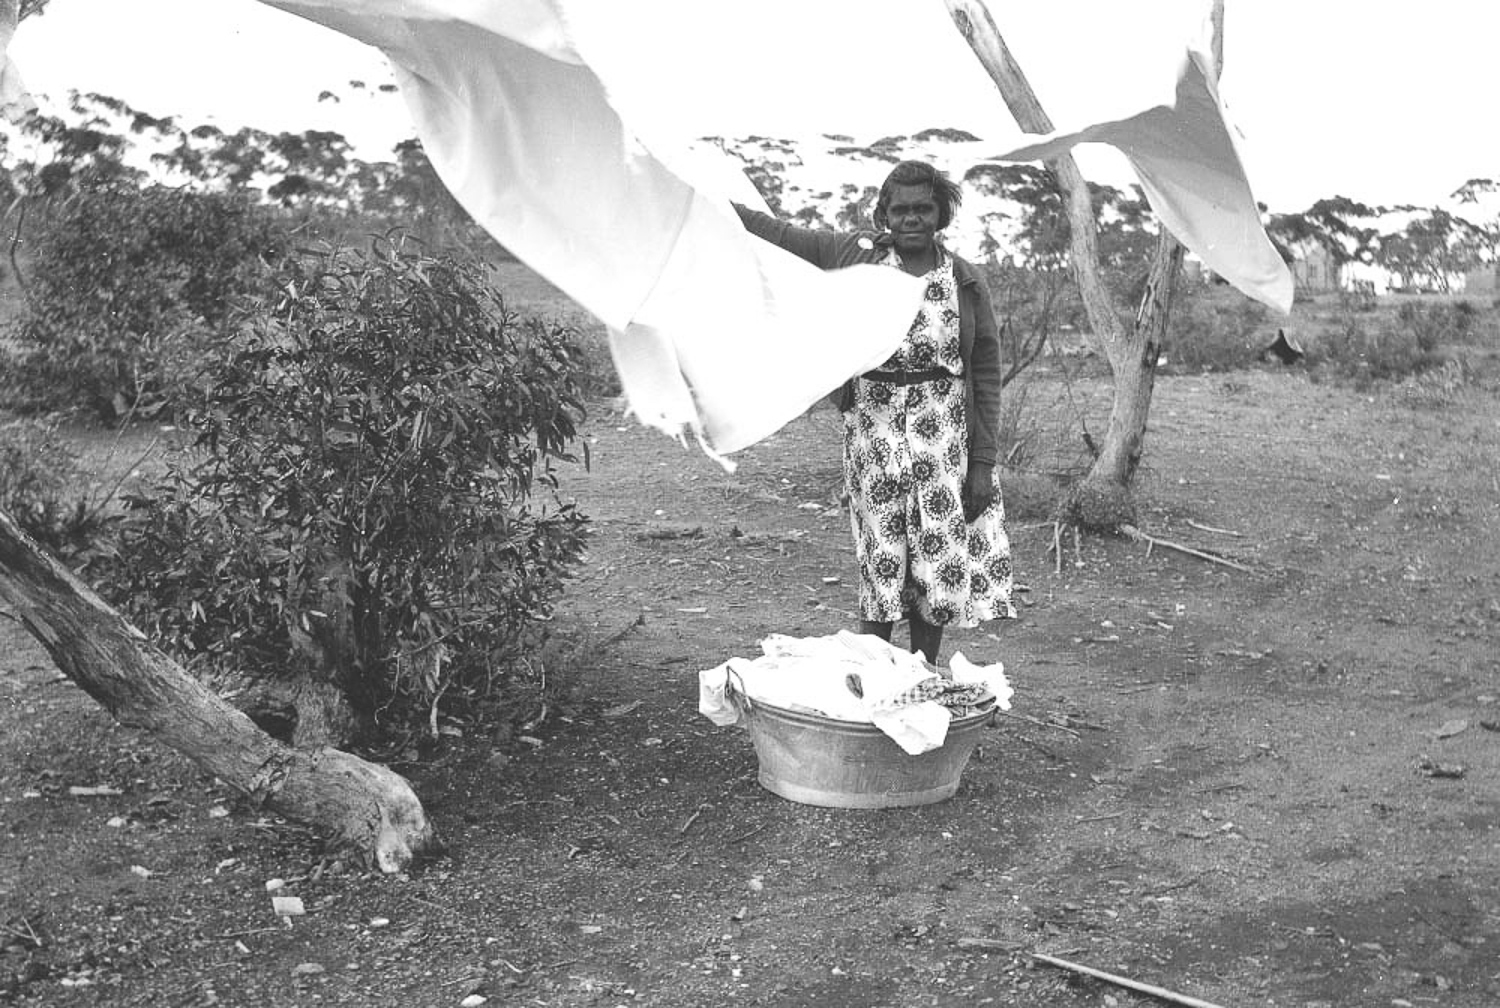 Marjorie Watson hanging out the mission washing in Cundeelee. Anangu women were often given households chores to do as part of mission life, as part of the assimilation process, and were often sent to farms to work as household labourers, for which they were never paid. 